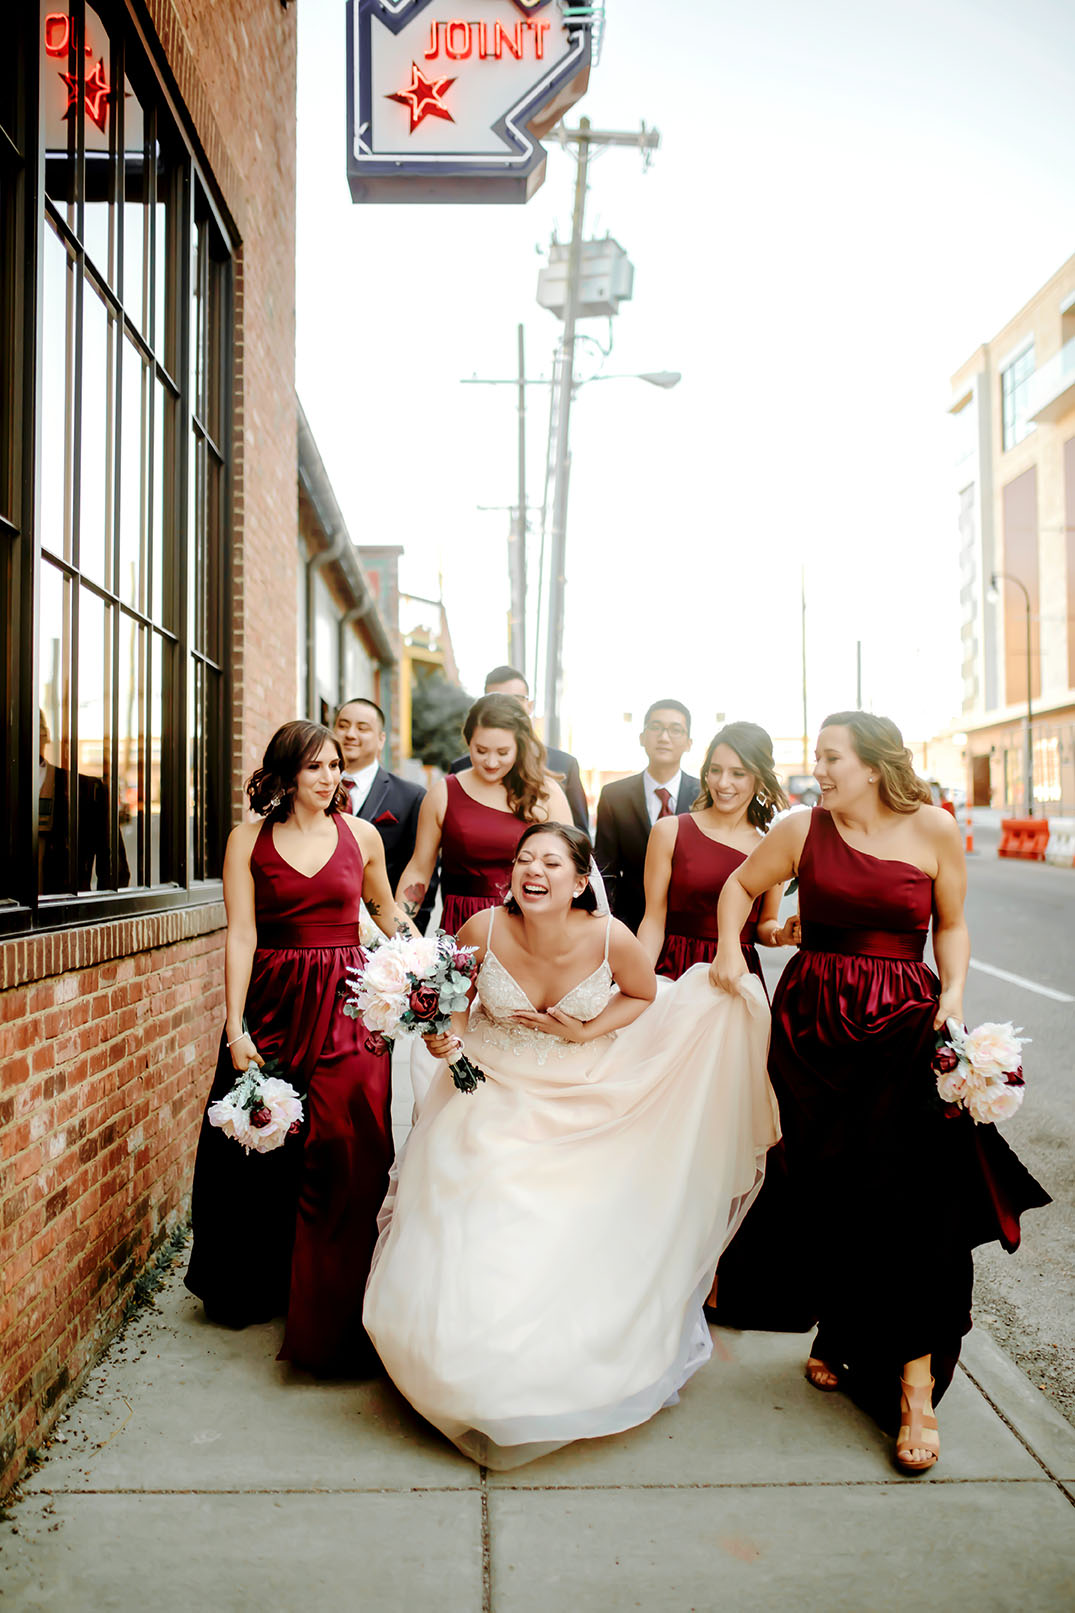 Val Laughing with Bridal Party